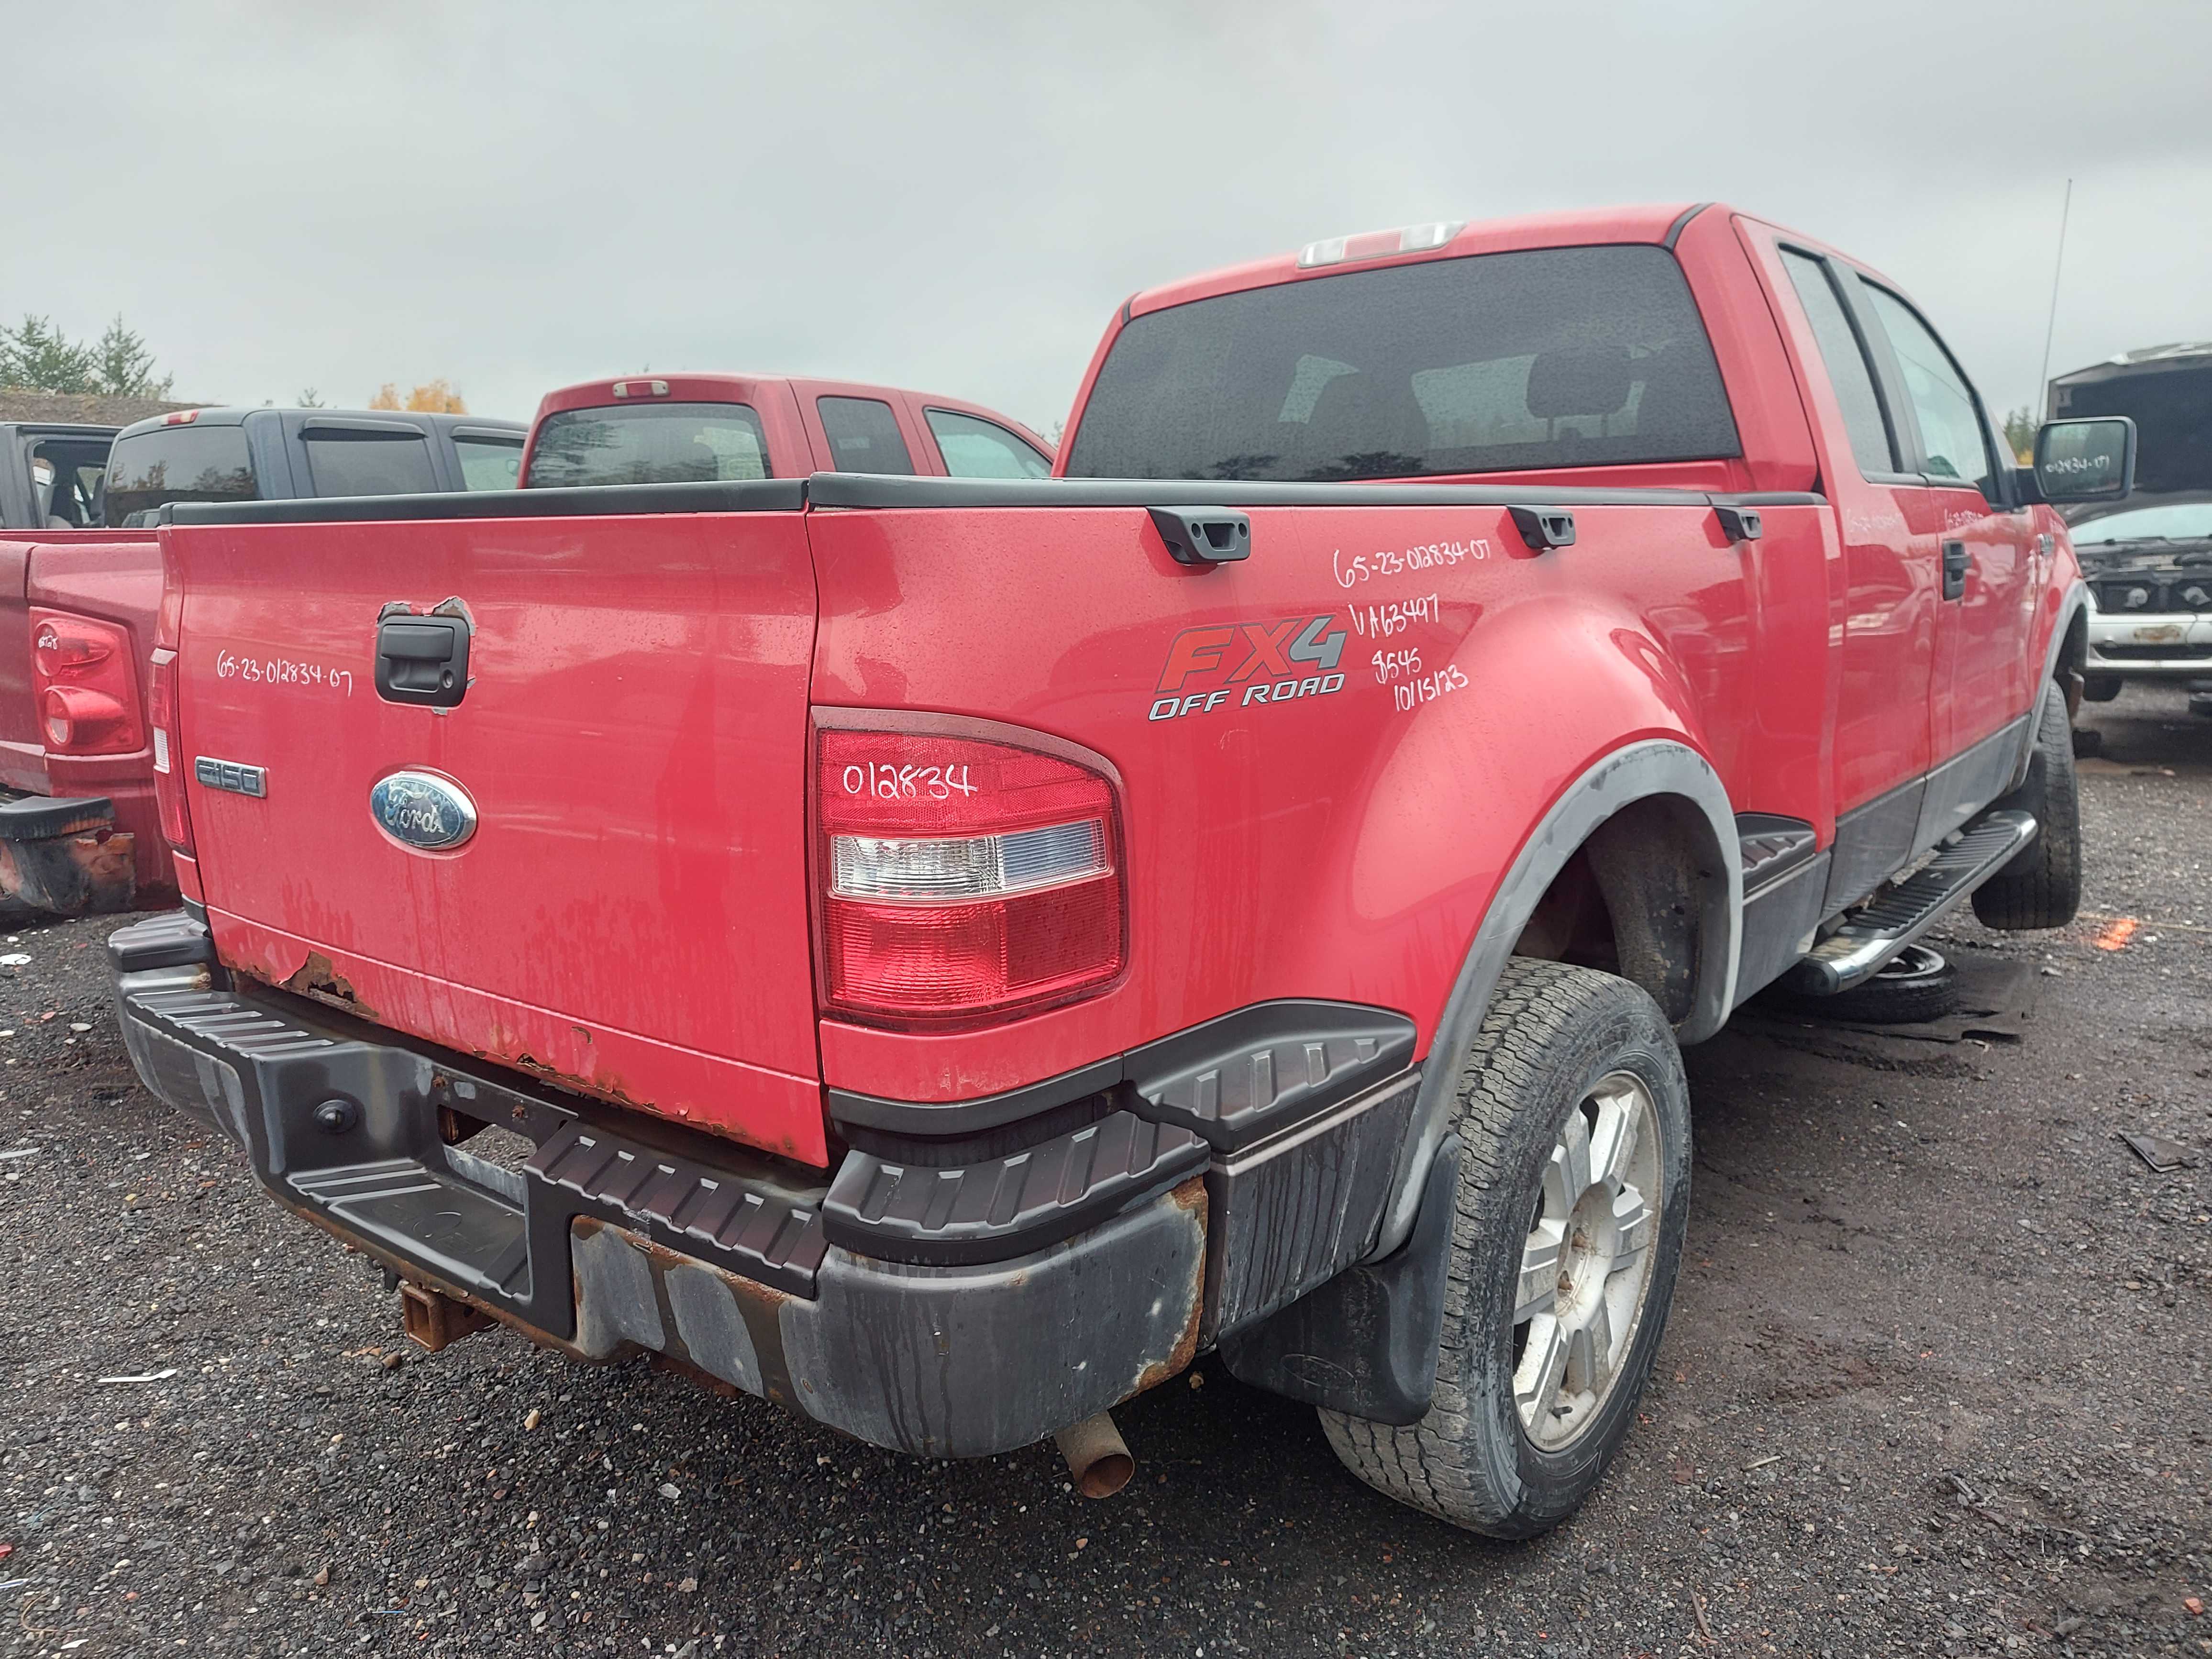 FORD F-150 2007